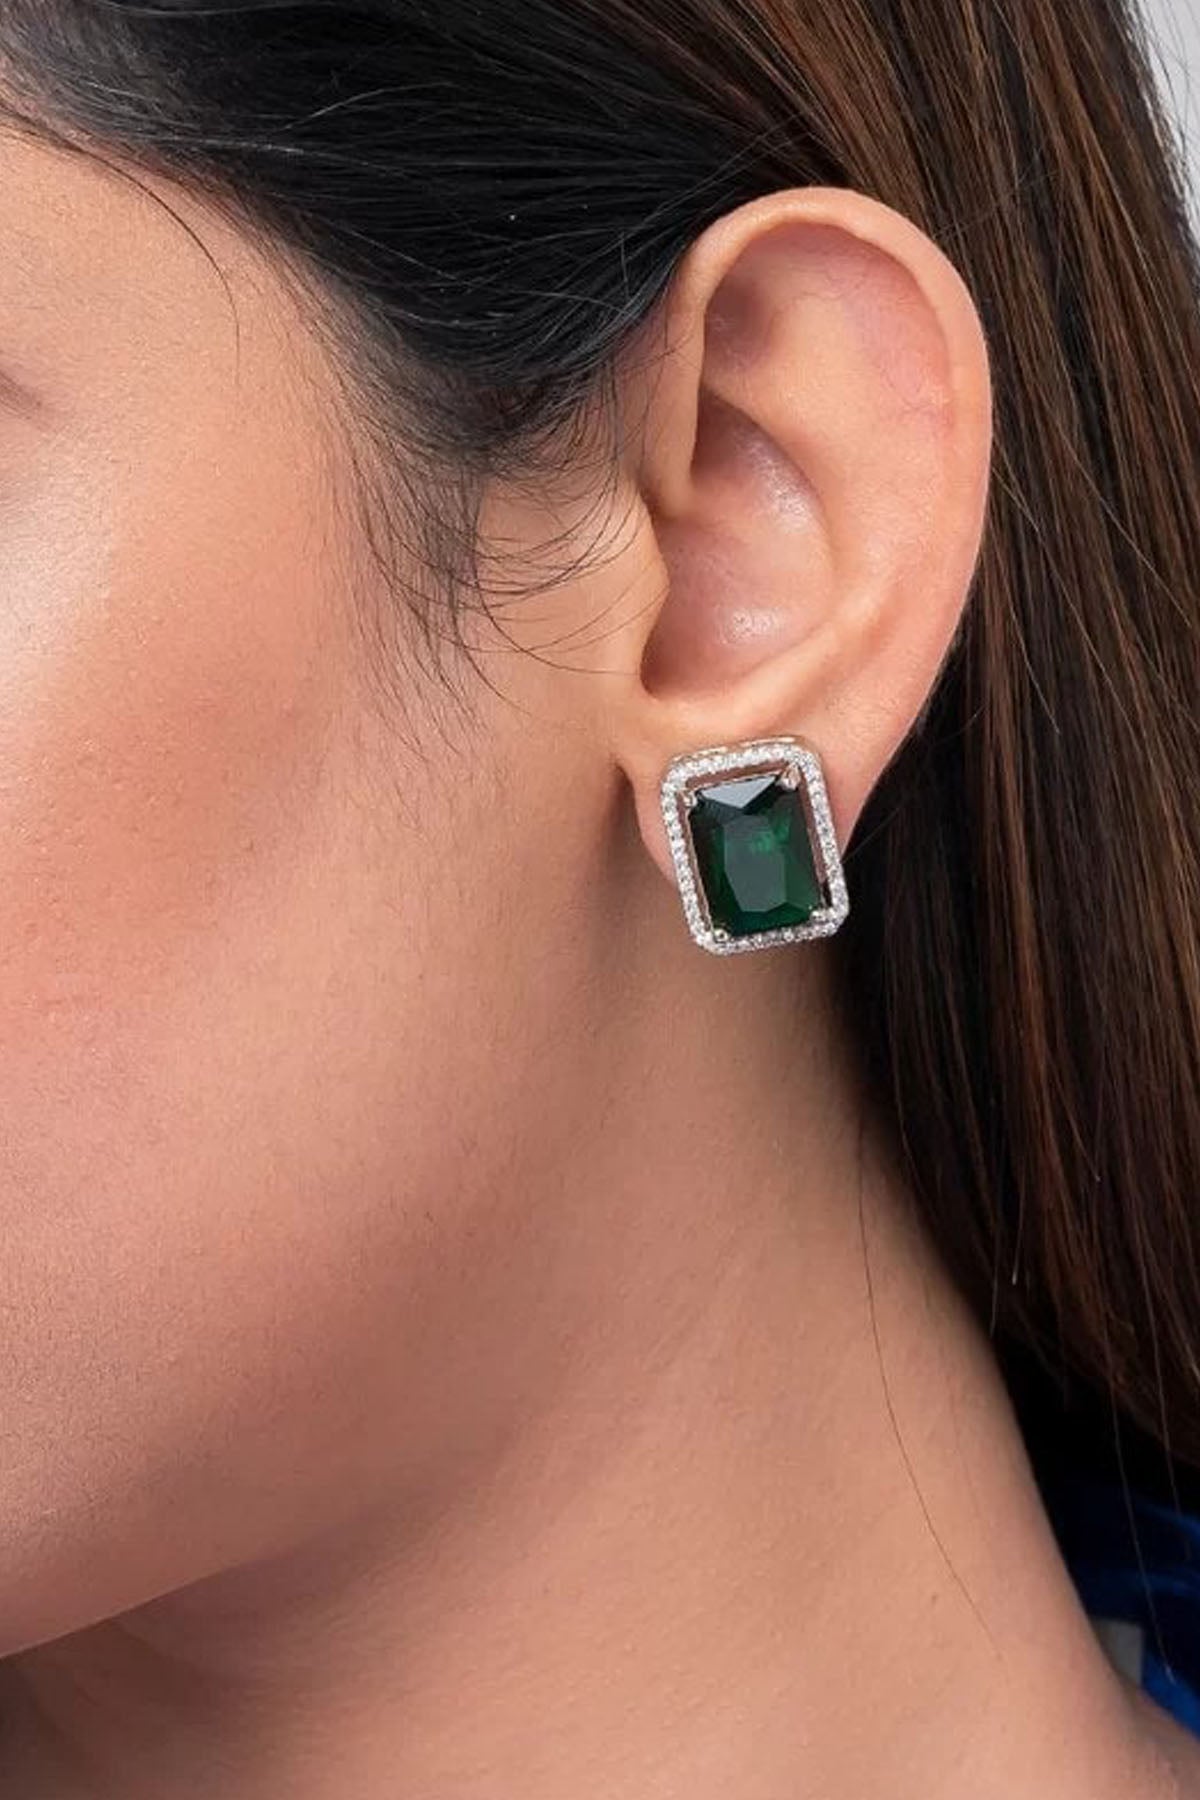 Green Rectangle Diamond Studs of Brand Putstyle Available online at ScrollnShops